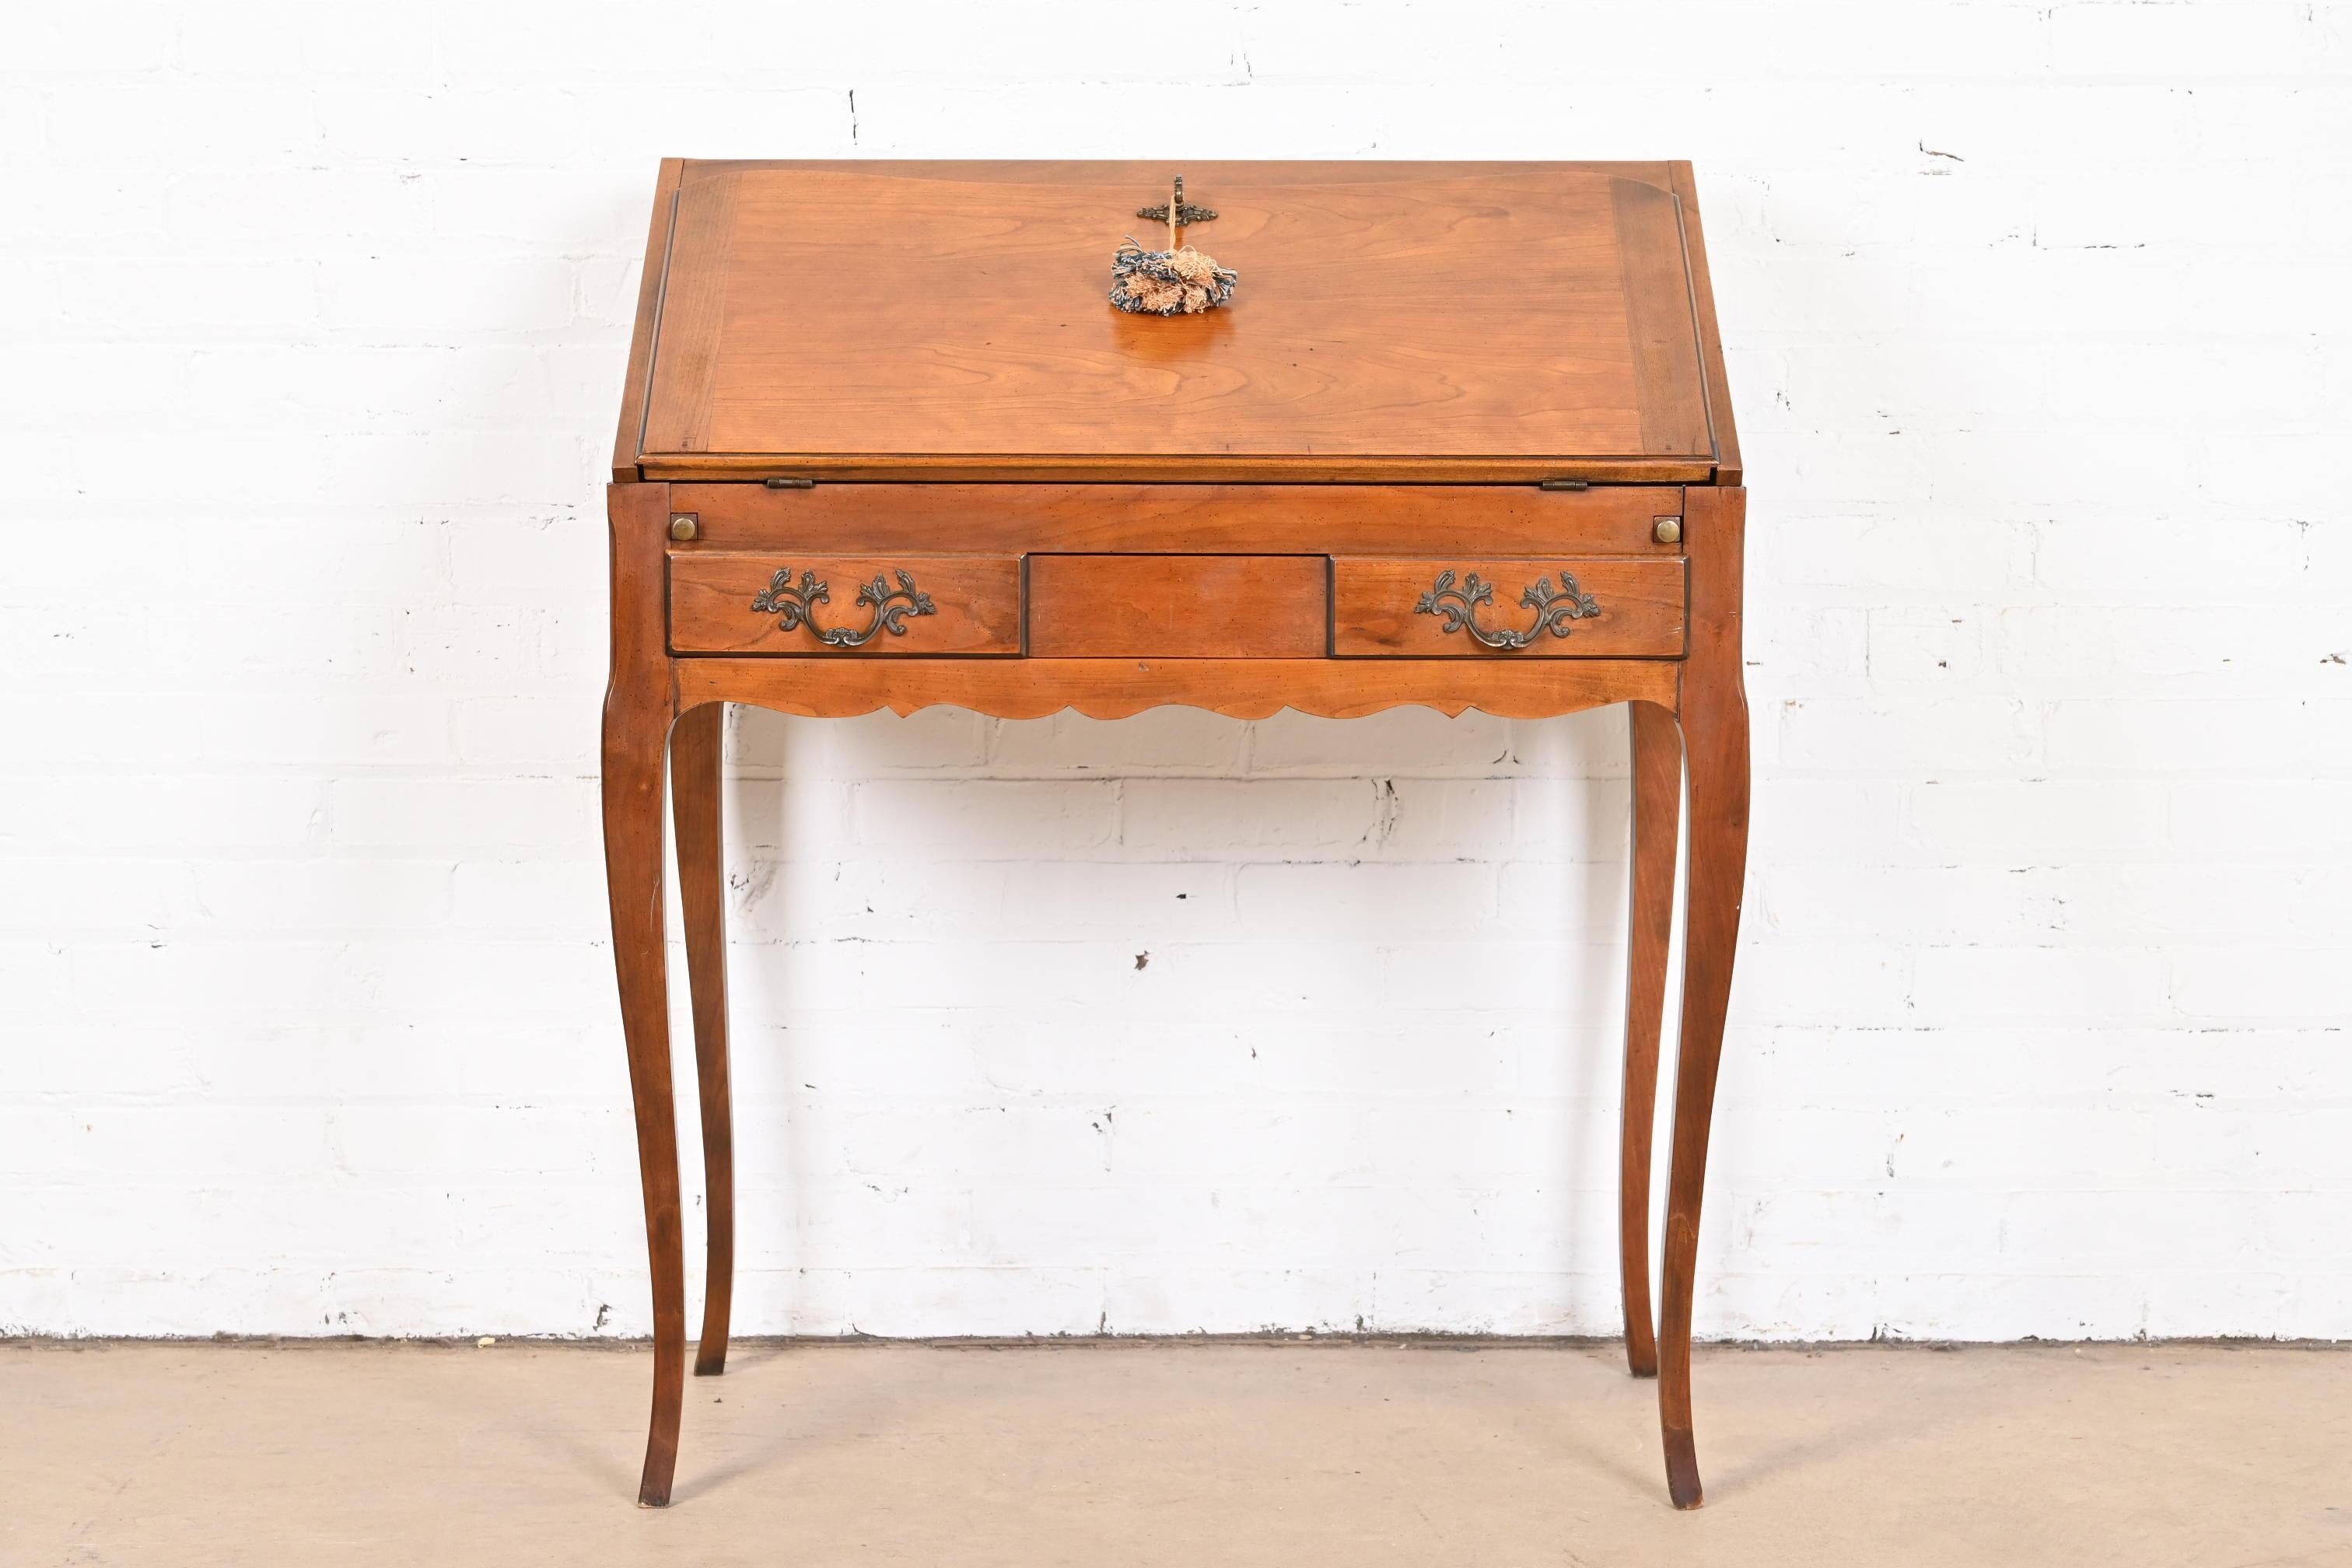 A gorgeous petite French Provincial Louis XV style slant front writing desk or secretary desk

USA, circa 1960s

Beautiful cherry wood, with original brass hardware.

Desk measures: 31.75